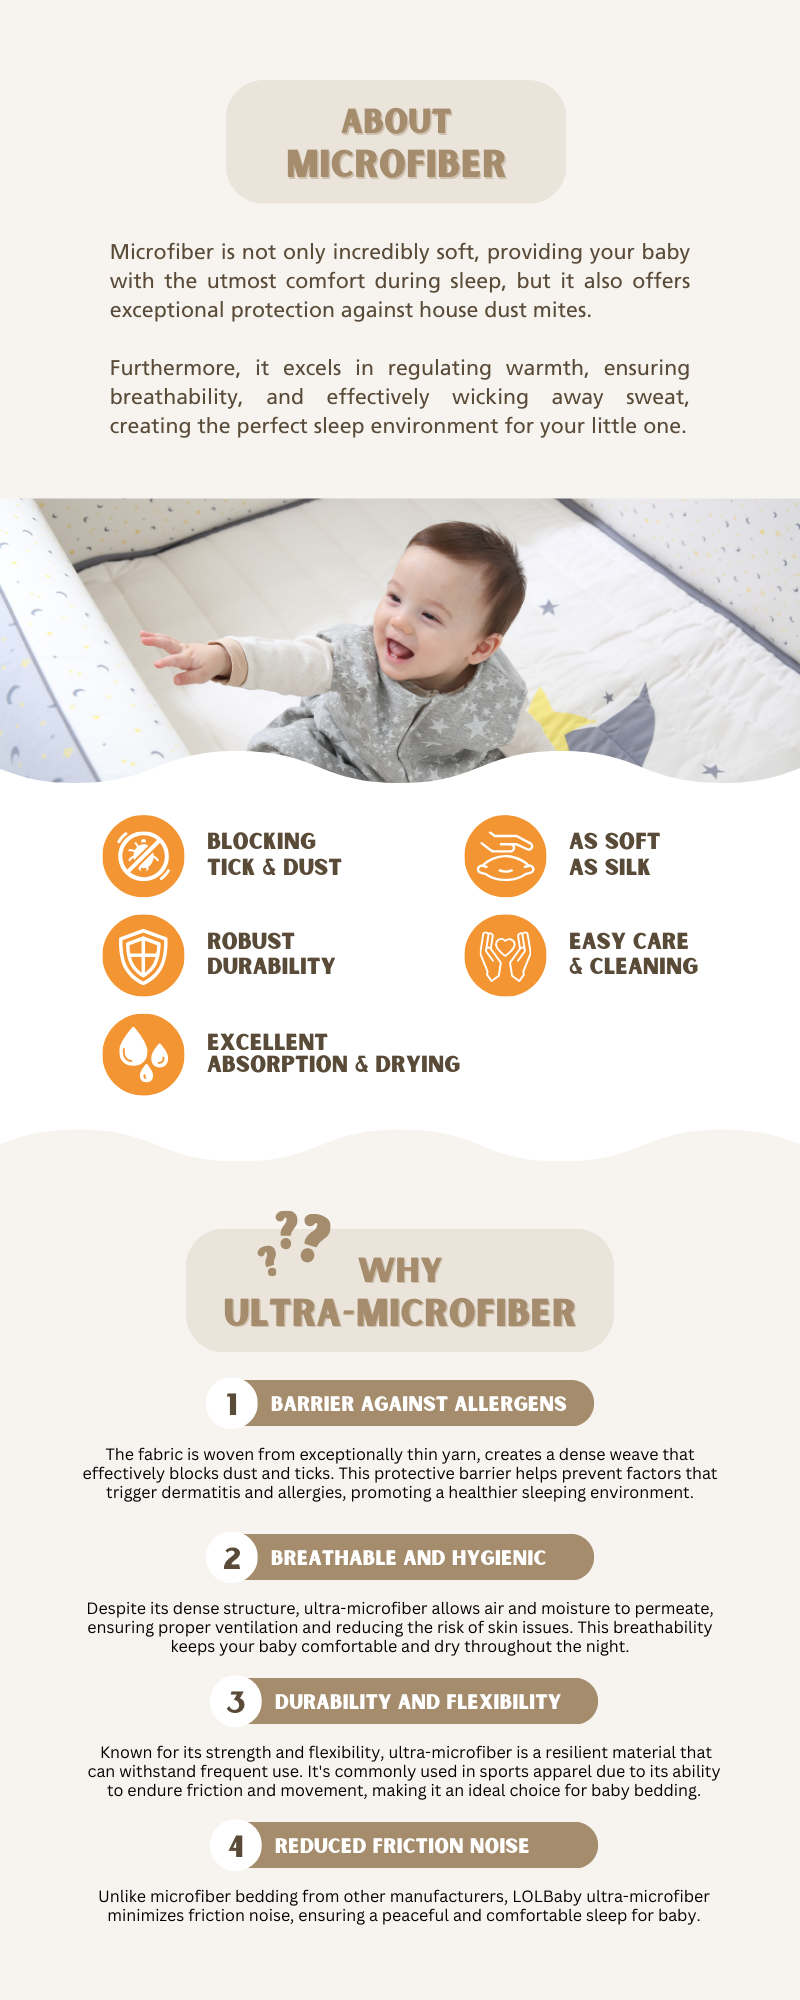 LOLBaby Microfiber Bumper Bed with Allergic Care